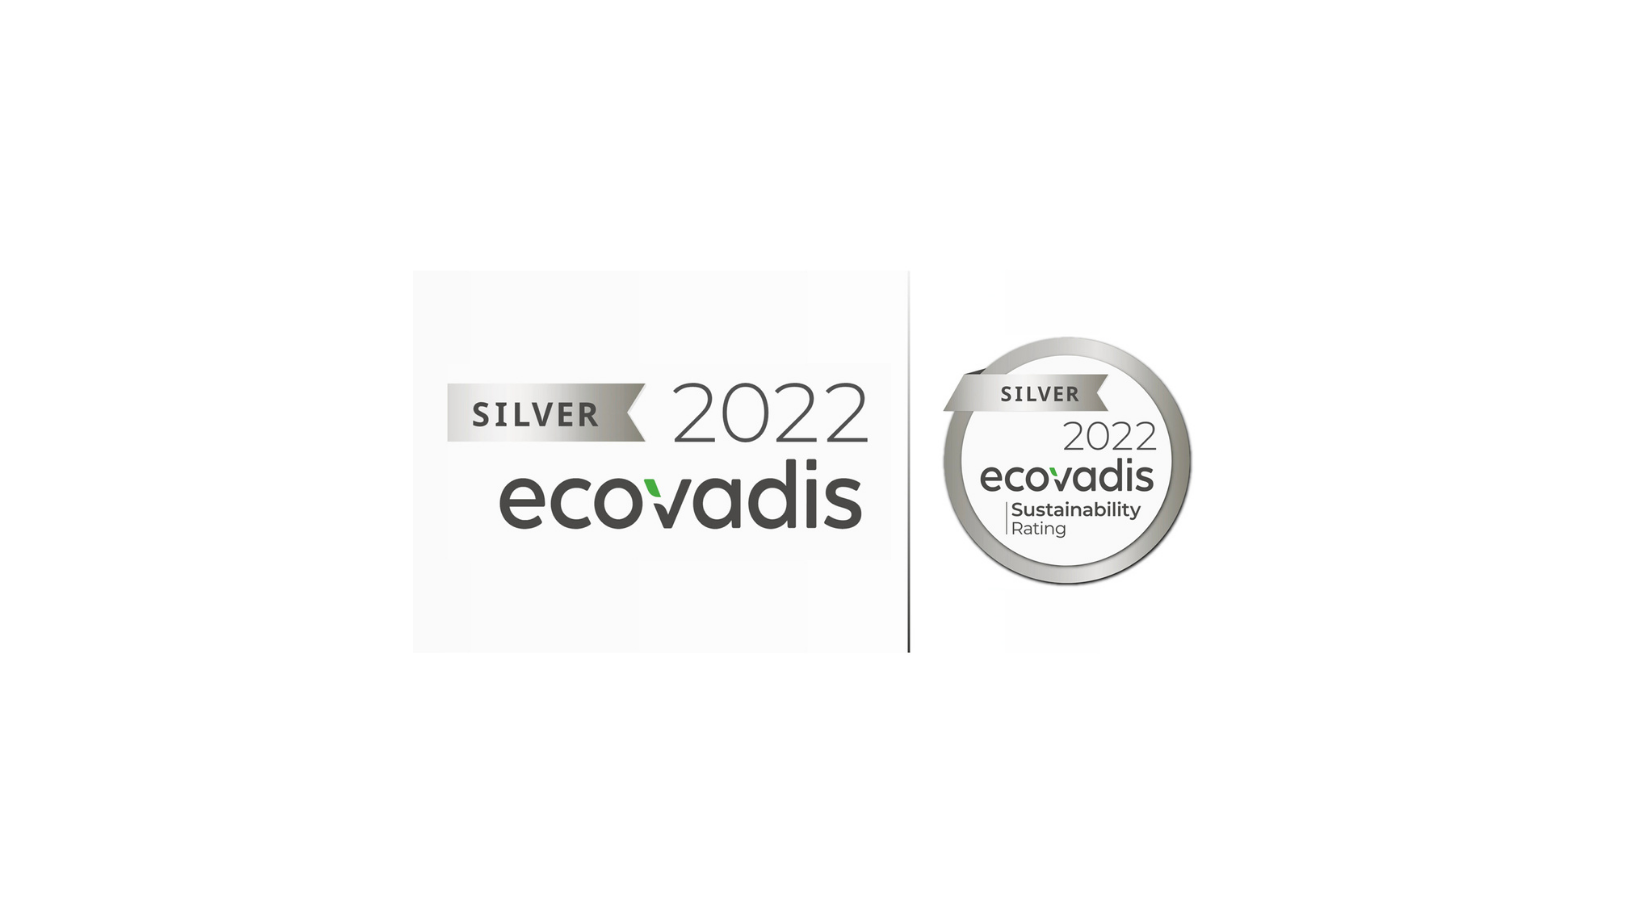 FinCo has been awarded with the silver medal by EcoVadis